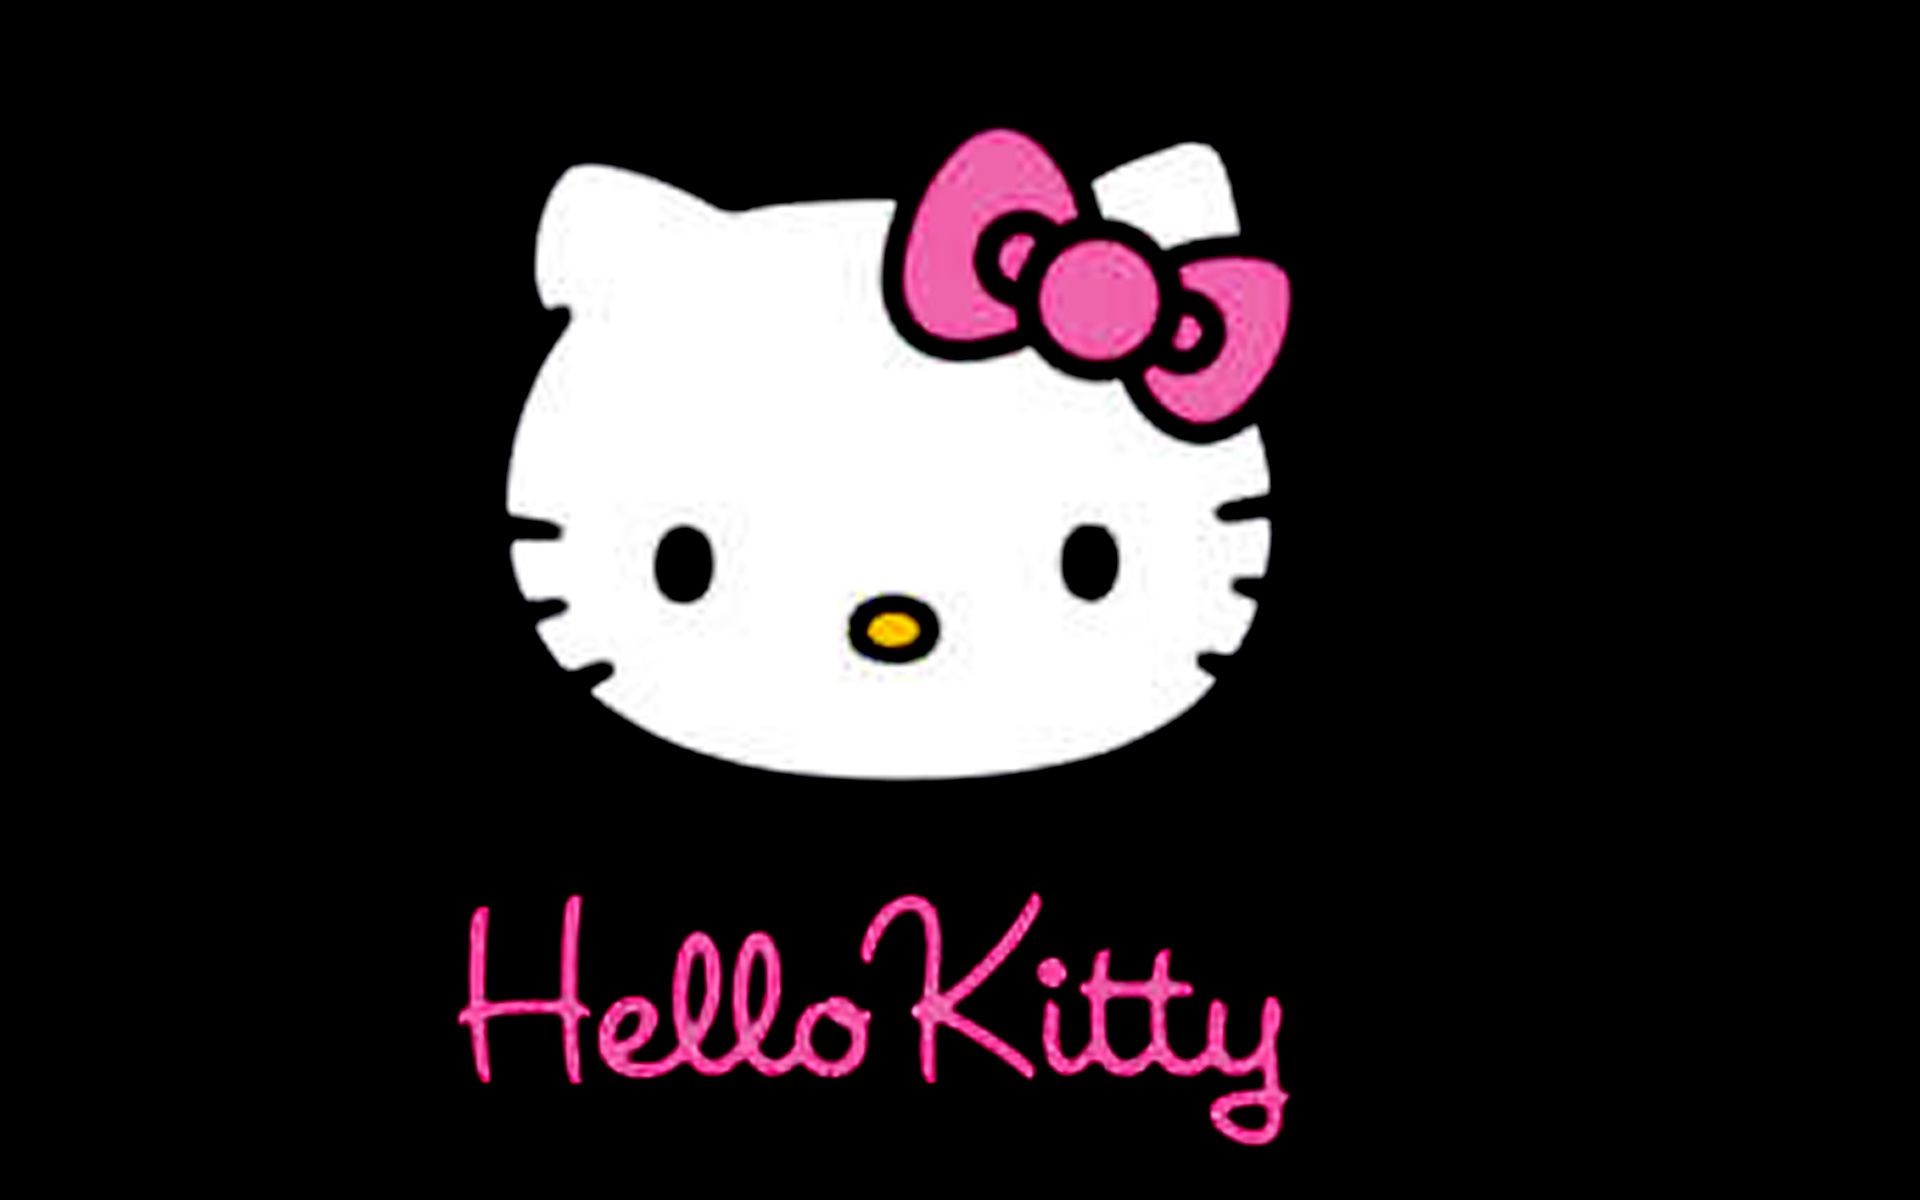 Hello Kitty Pink And Black Love Wallpaper For Android #xekd4